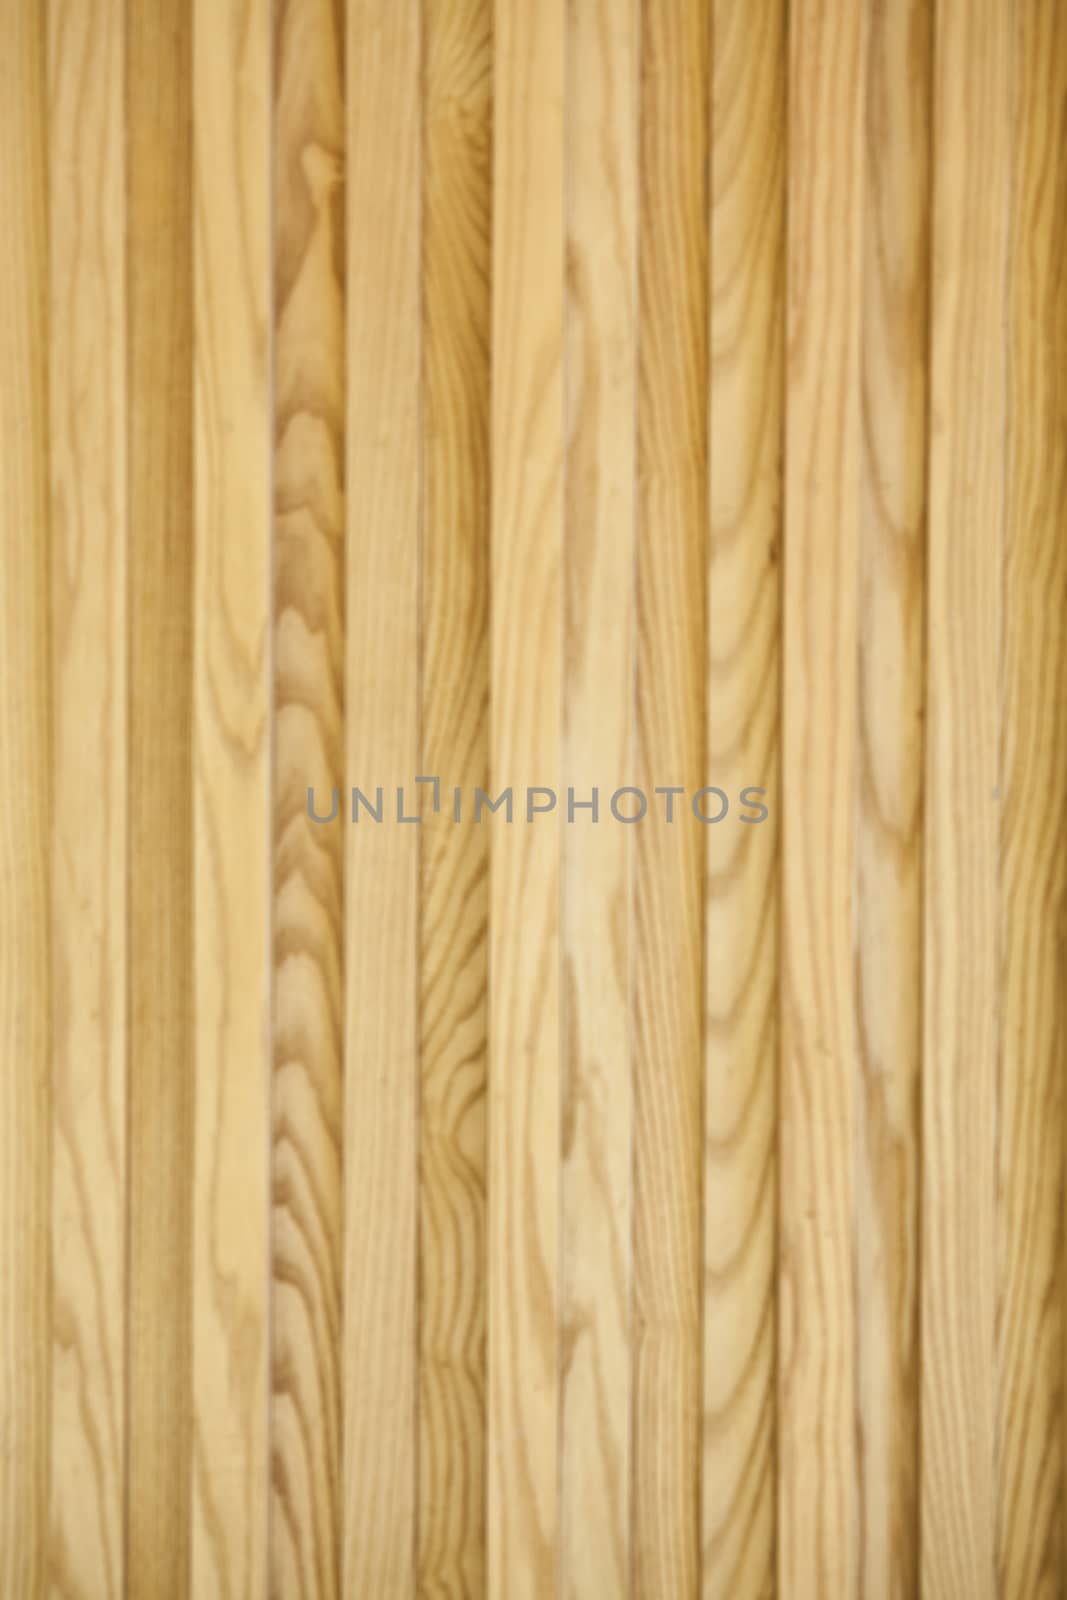 Wooden panel wall interior, Blurred background